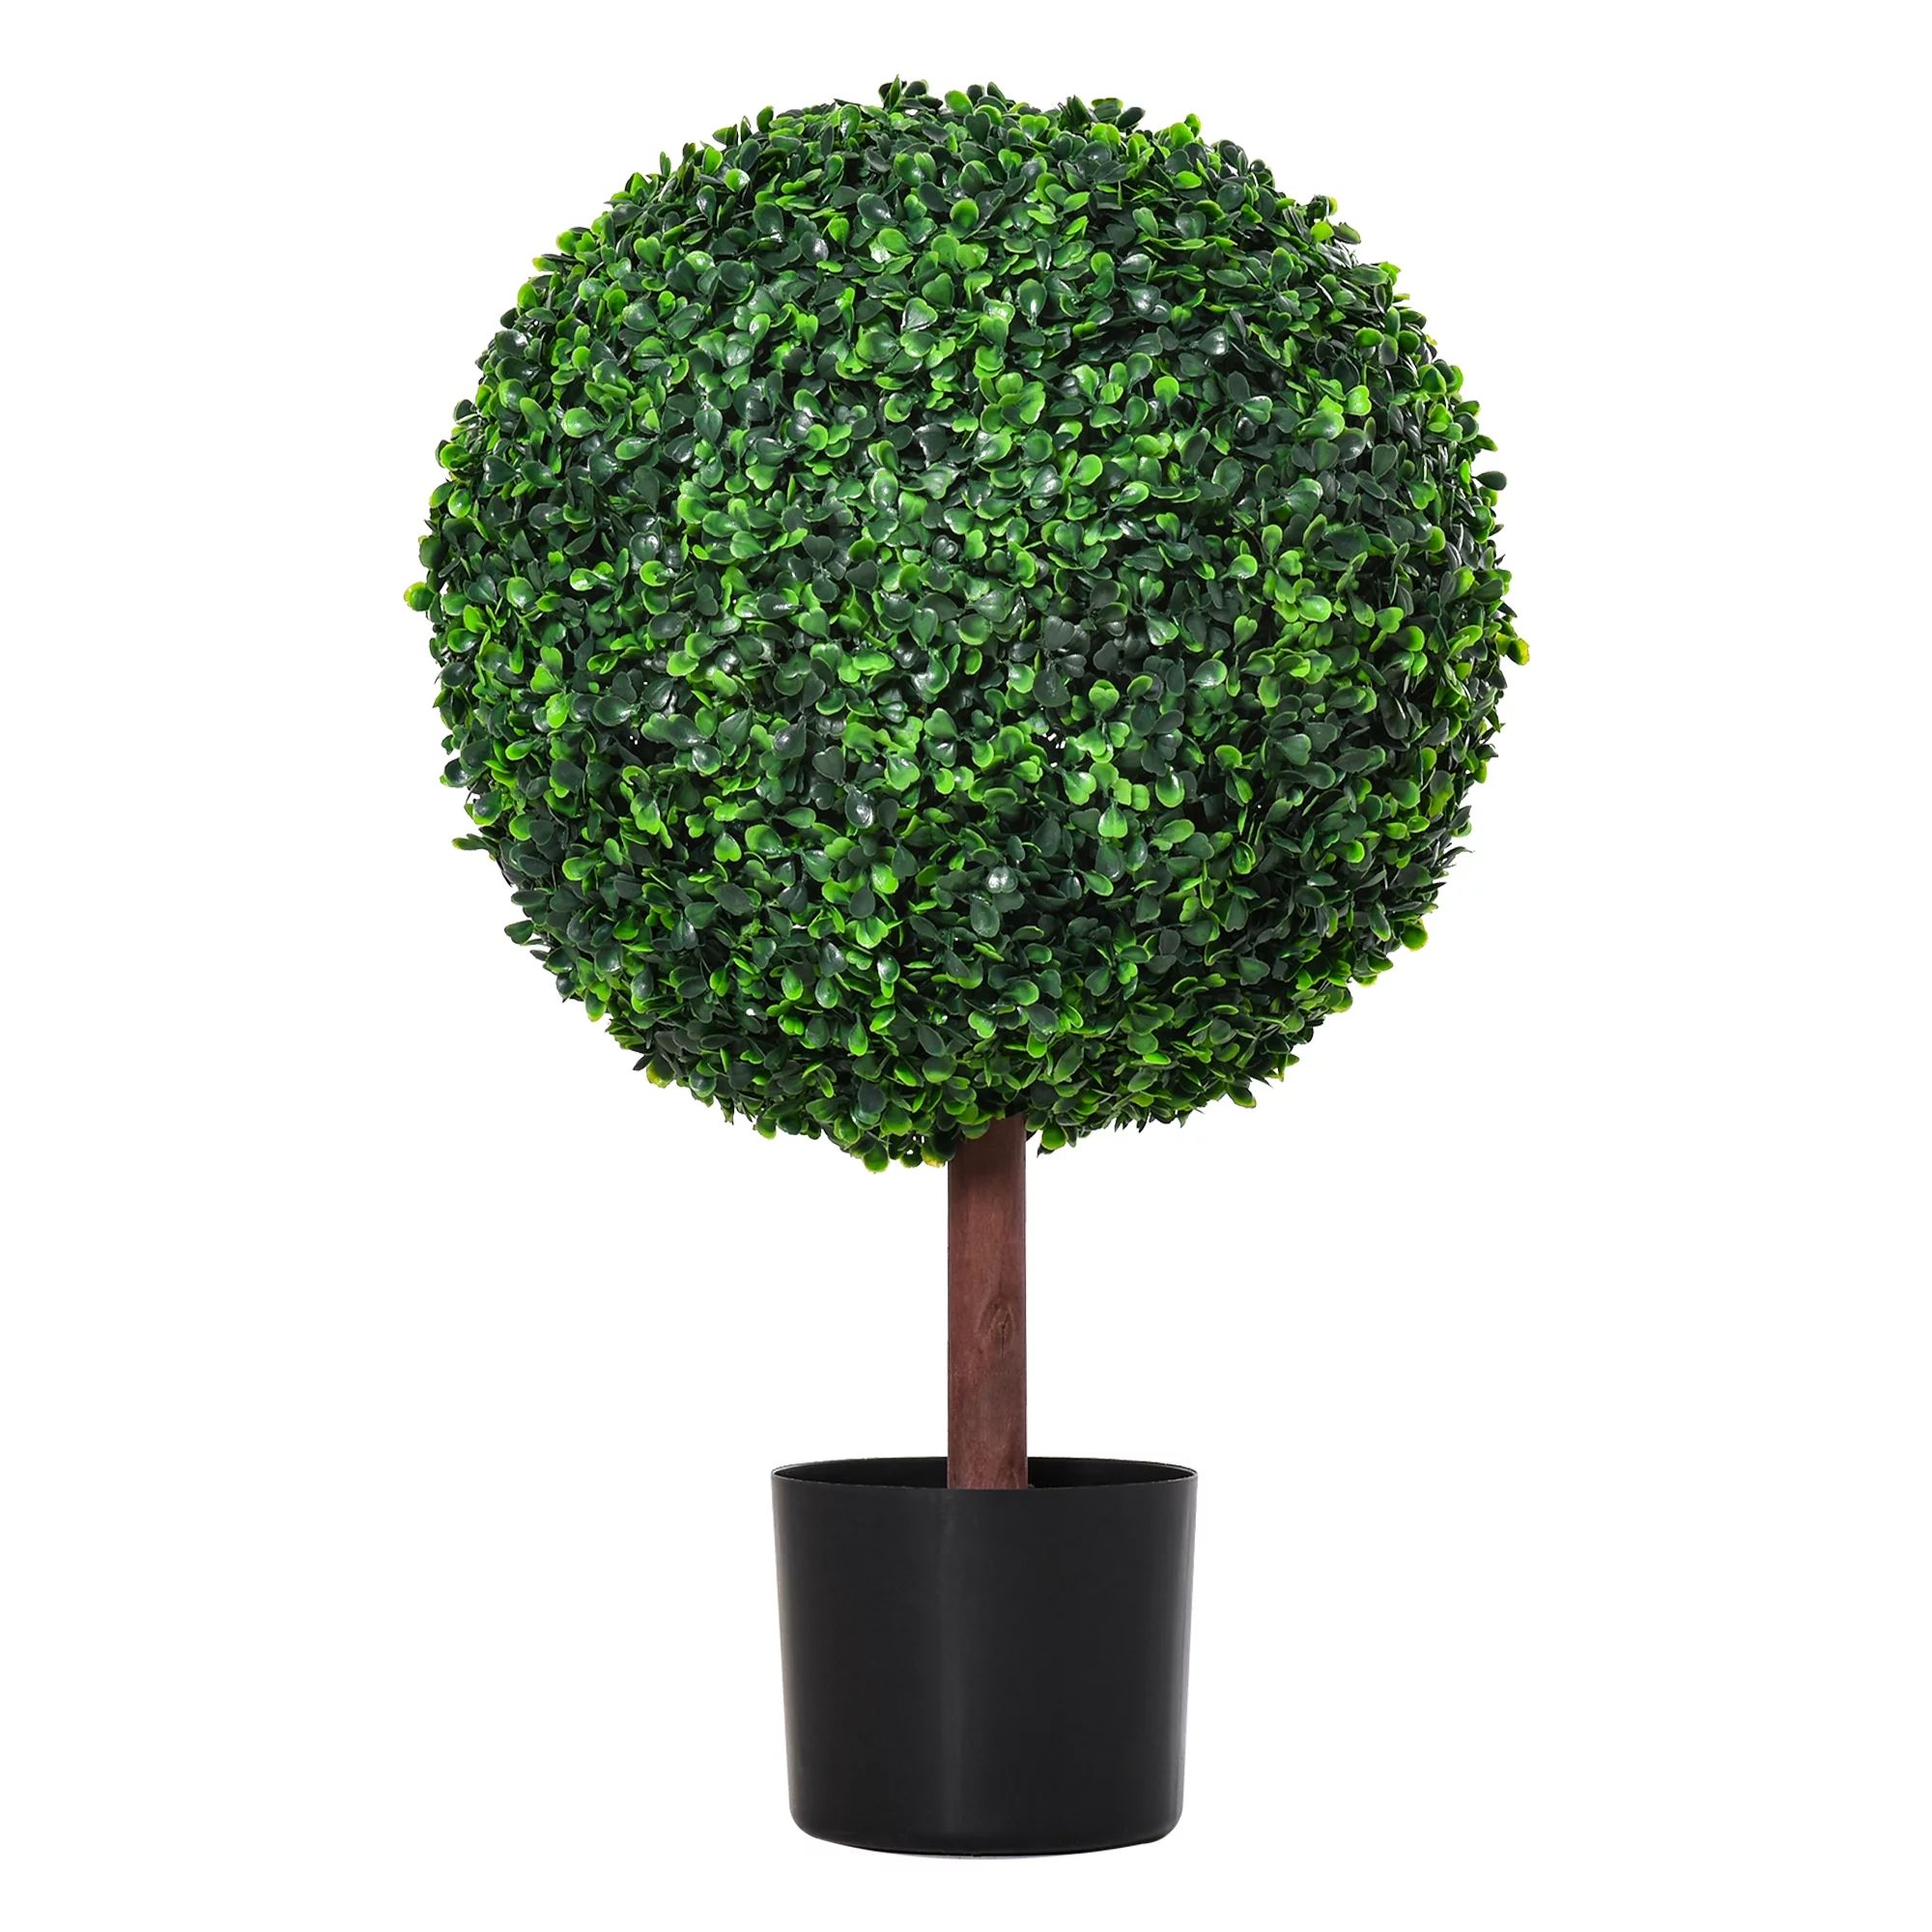 Outsunny 23.5" Artificial Boxwood Topiary Ball Tree, Fake Decorative Plant, Nursery Pot Included ... | Walmart (US)